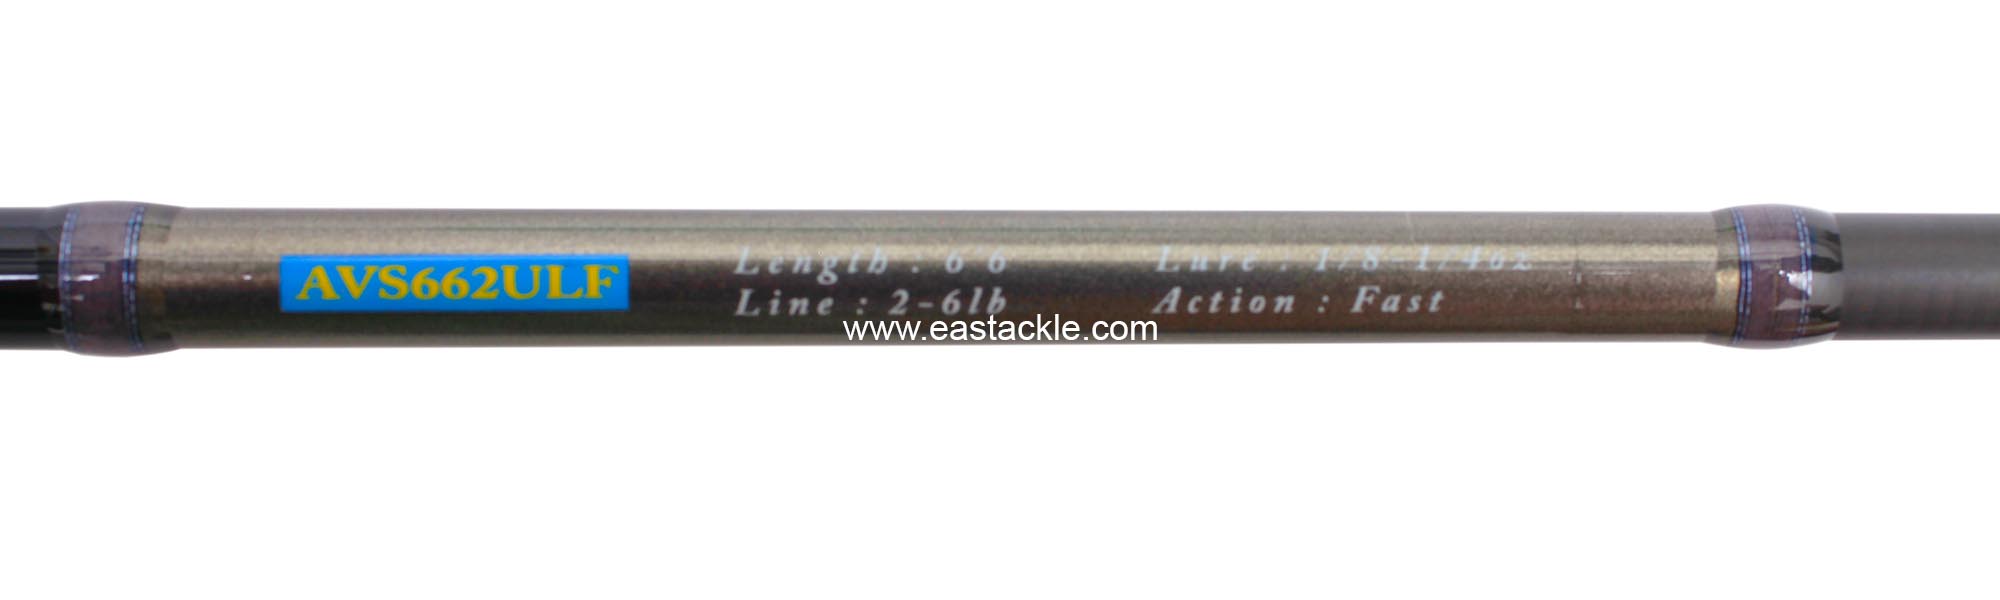 Storm - Adventure - AVS662ULF - Spinning Rod - Blank Specifications | Eastackle